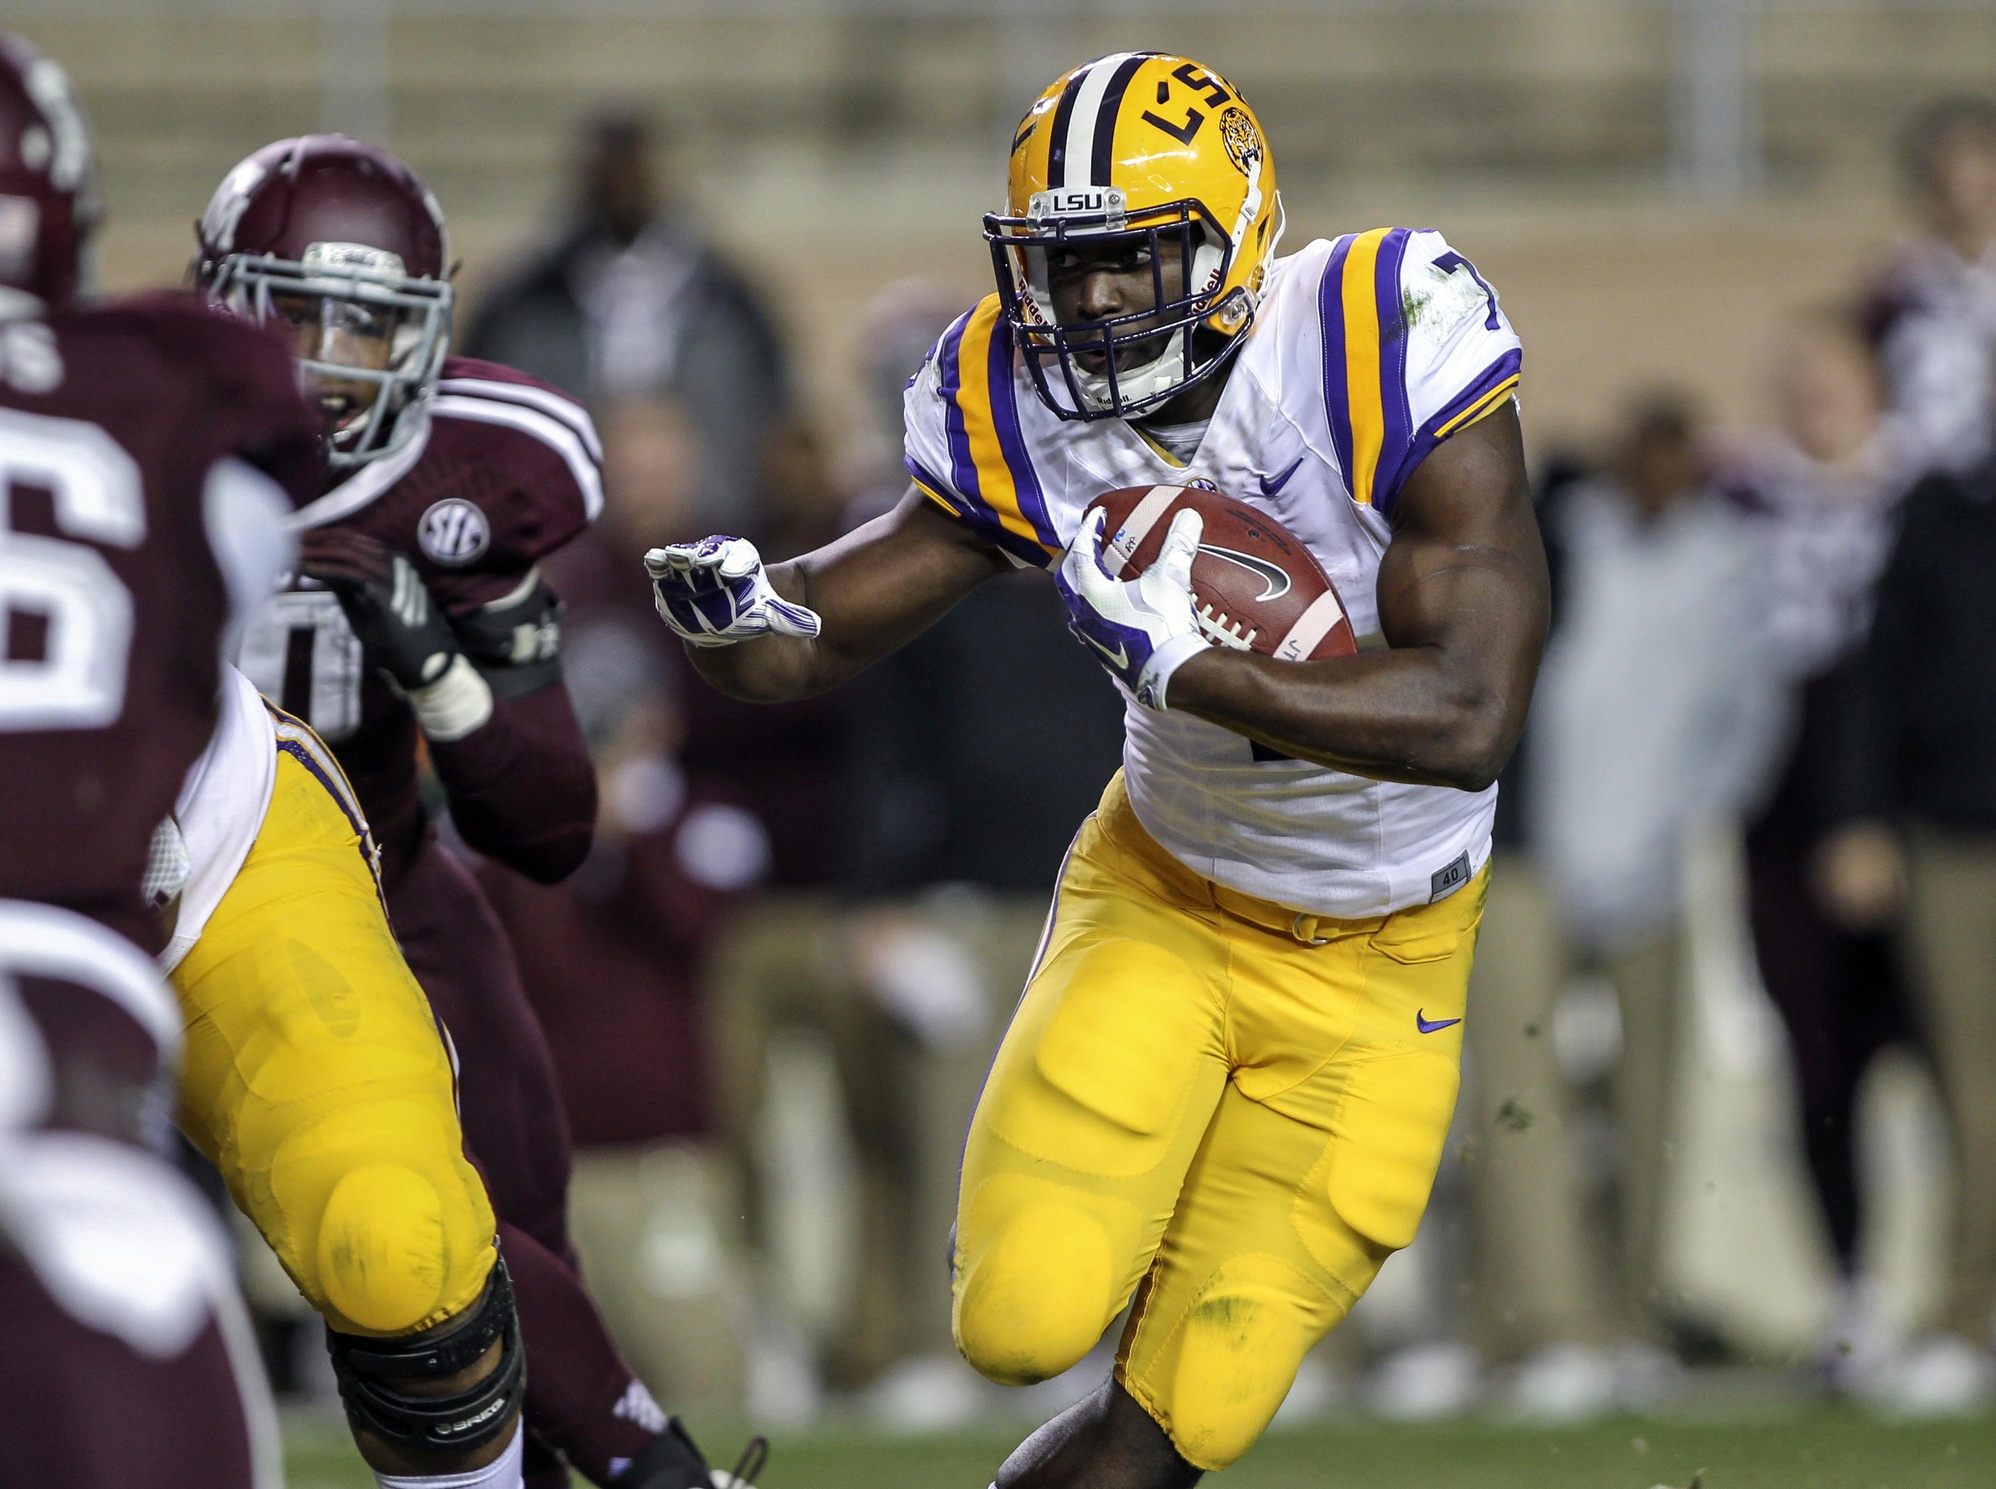 Nov 27, 2014; College Station, TX, USA; LSU Tigers running back Leonard Fournette (7) rushes during the second quarter against the Texas A&M Aggies at Kyle Field. Mandatory Credit: Troy Taormina-USA TODAY Sports